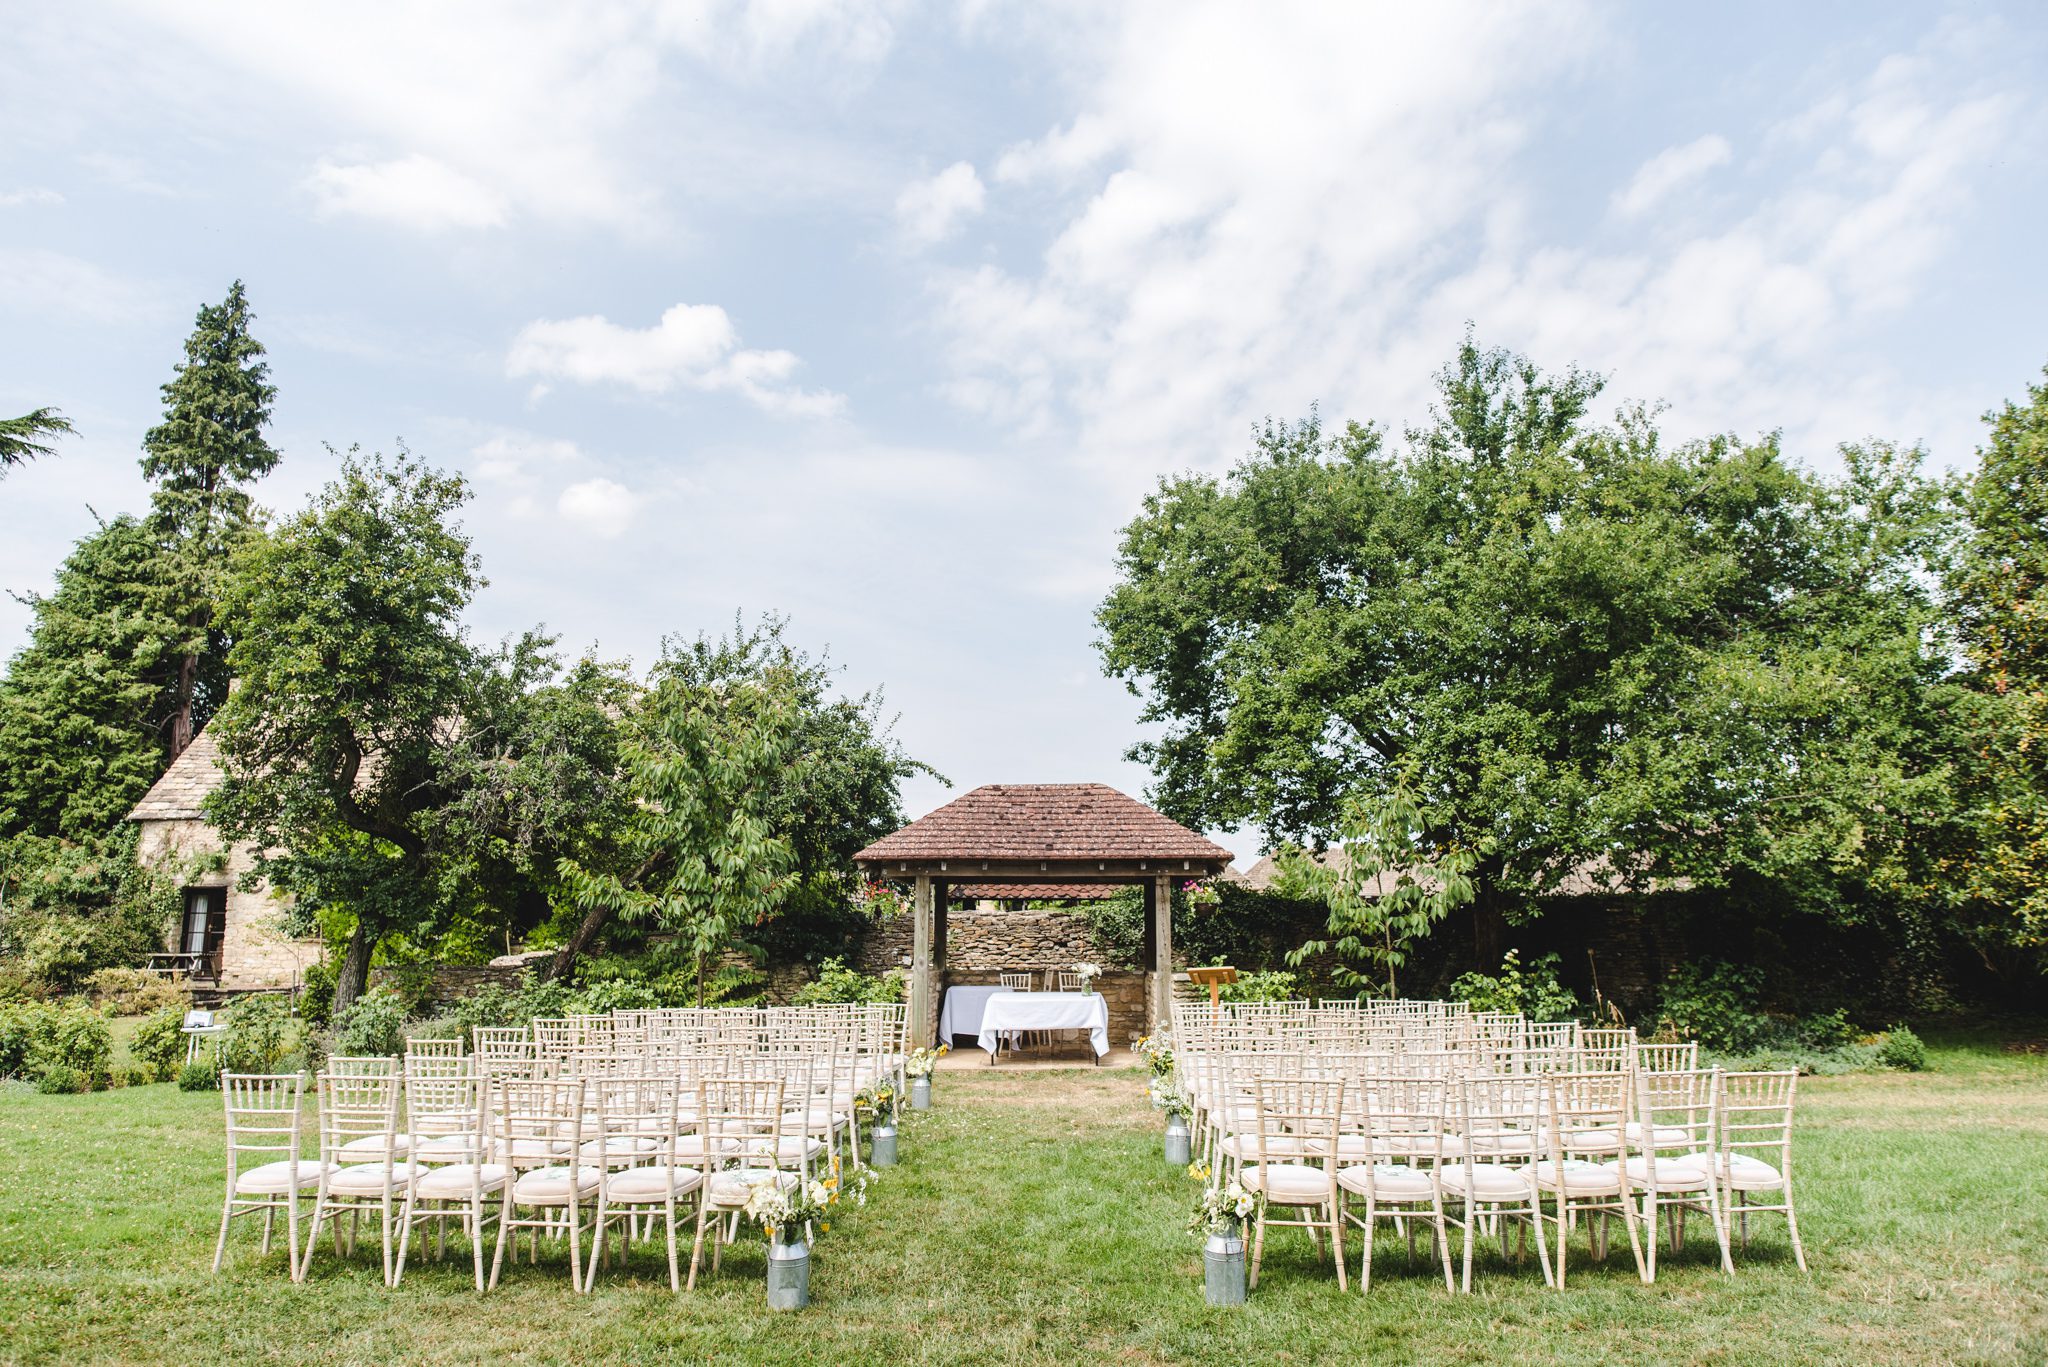 Outdoor ceremony set up at the Great Tythe Barn